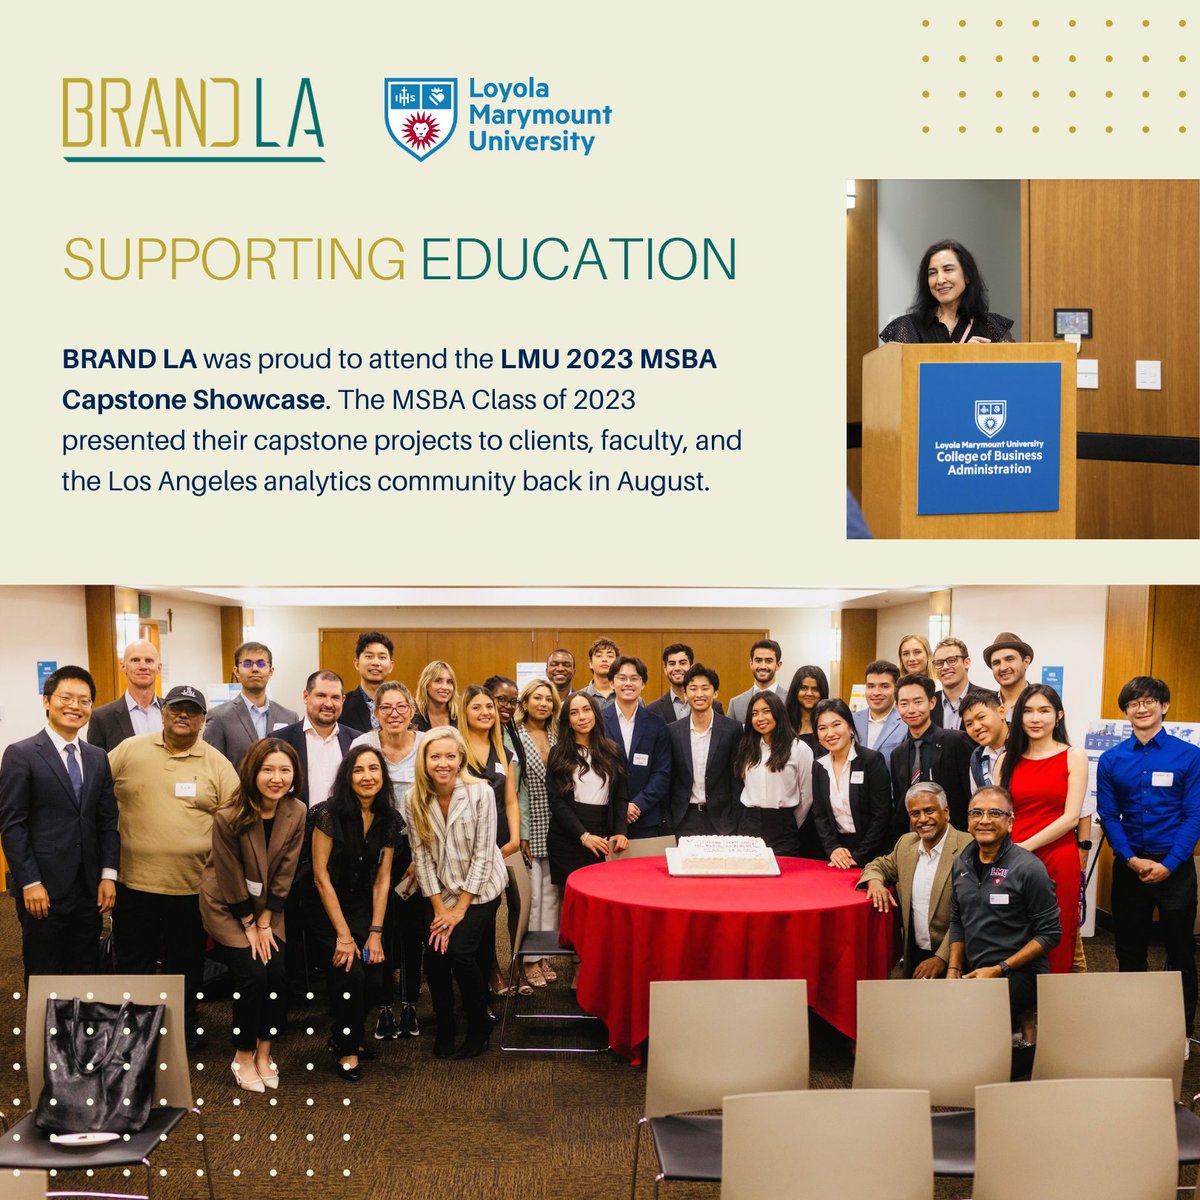 #ThrowbackThursday Brand LA at @LoyolaMarymount  @LMUCBA 2023 MSBA Capstone Showcase. The Class of 2023 presented their capstone projects to clients, faculty, and the #LosAngeles #analytics community. Learn more ow.ly/wccy50PIATk